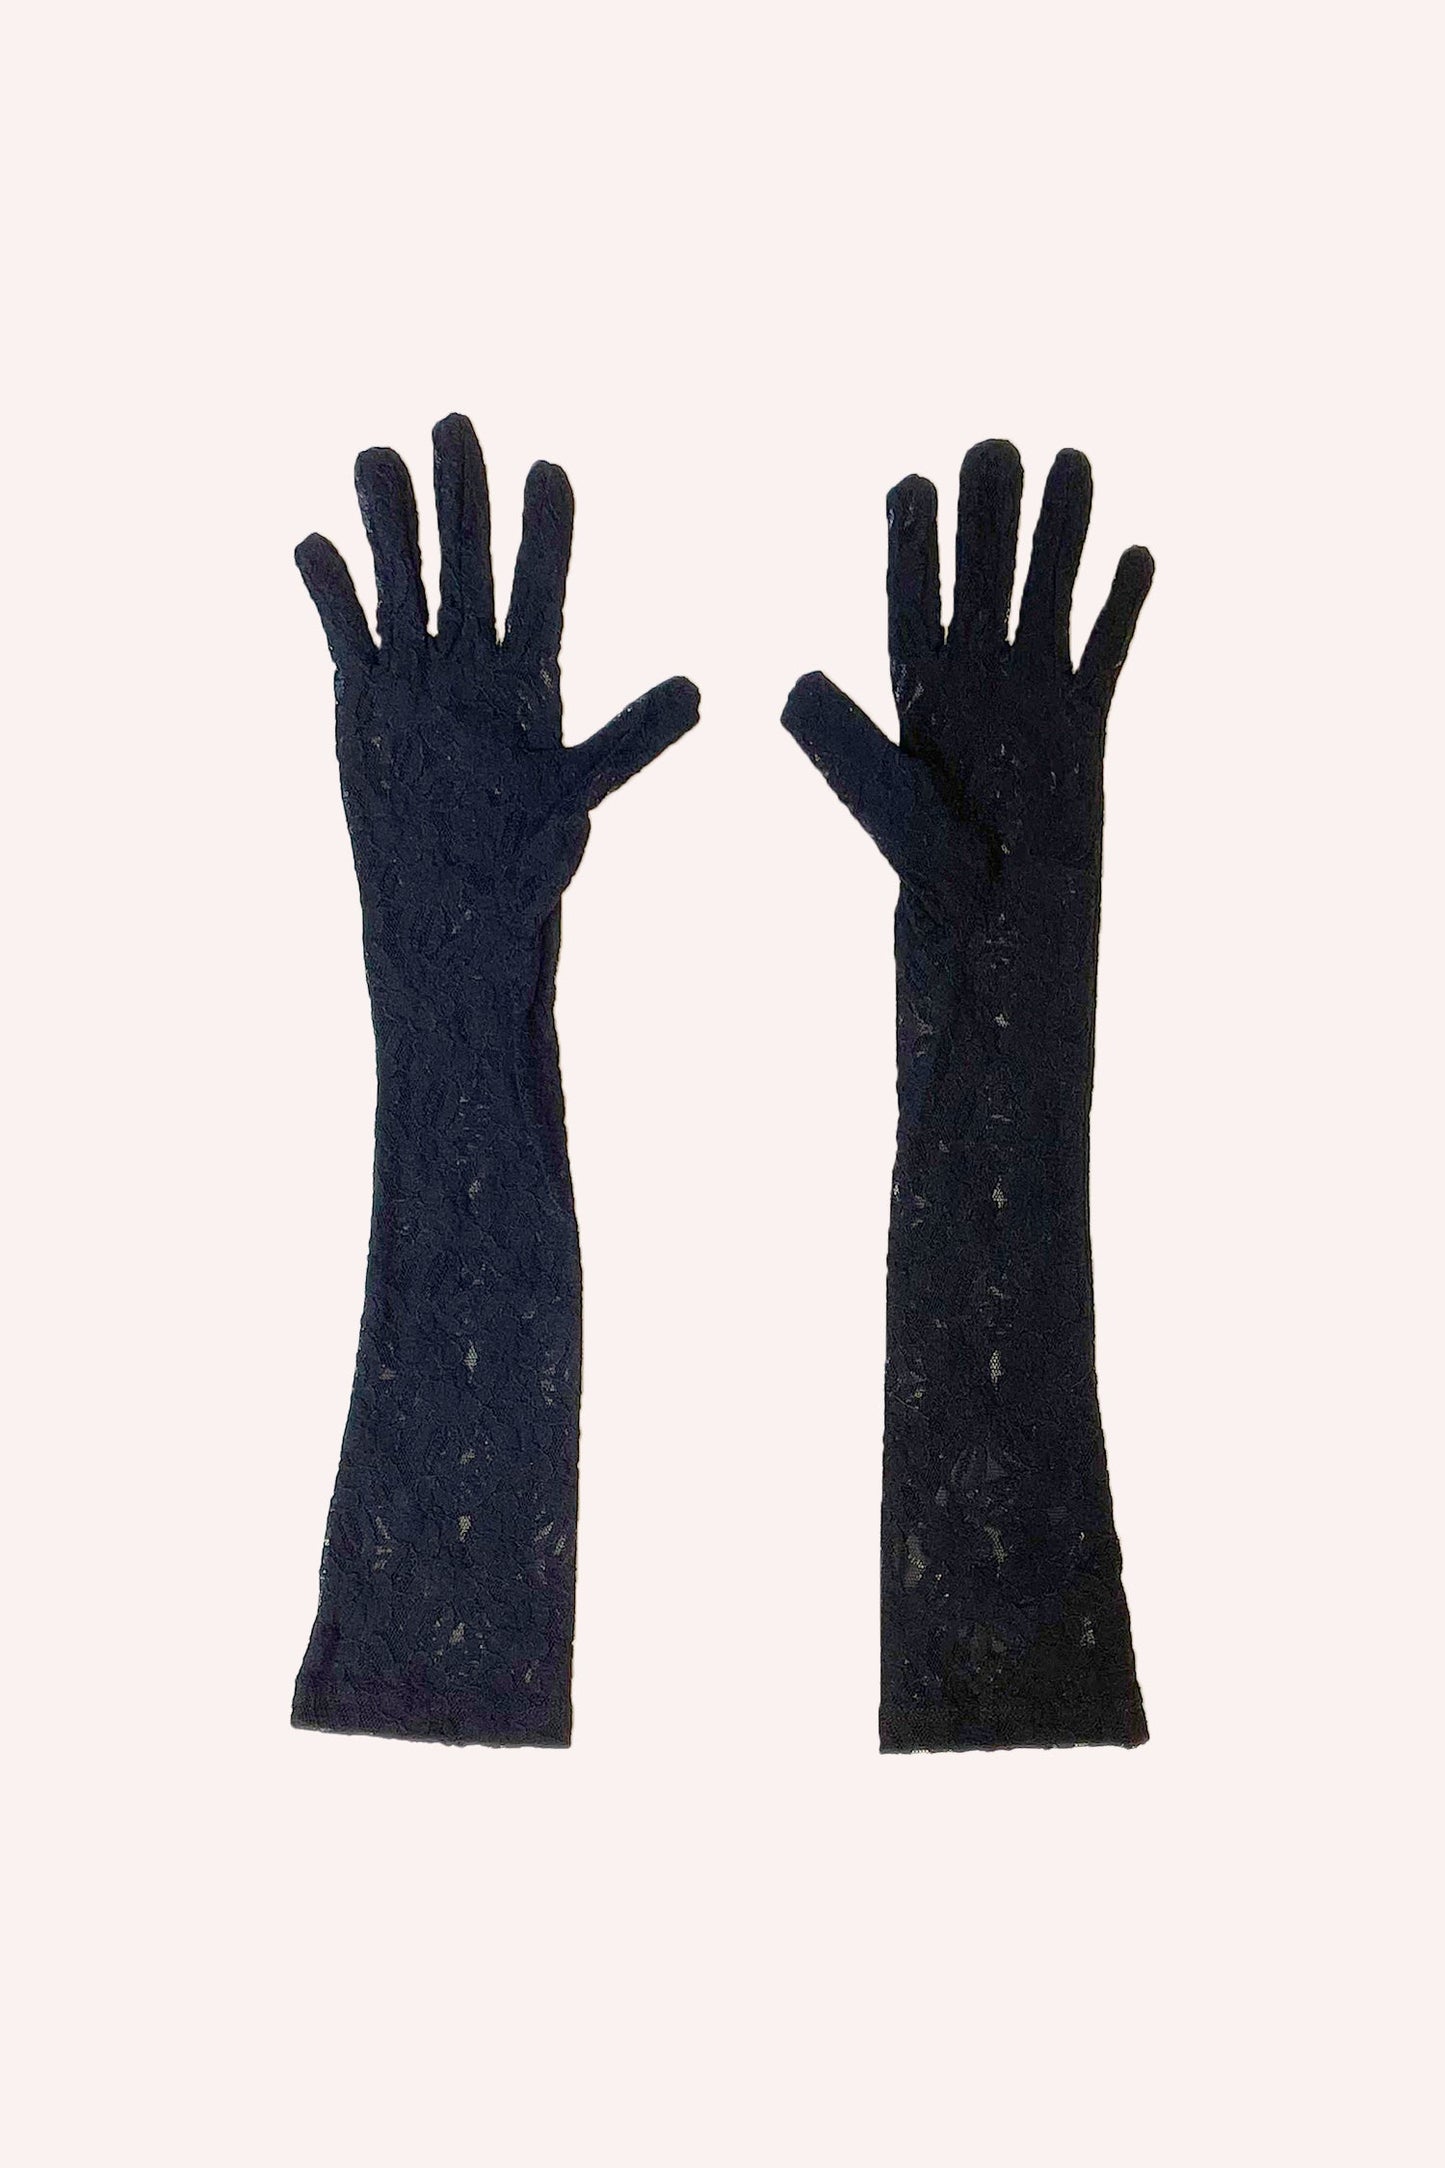 Floral Stretch Lace Gloves Black, elbow-length gloves, floral pattern to add glamour to any outfit